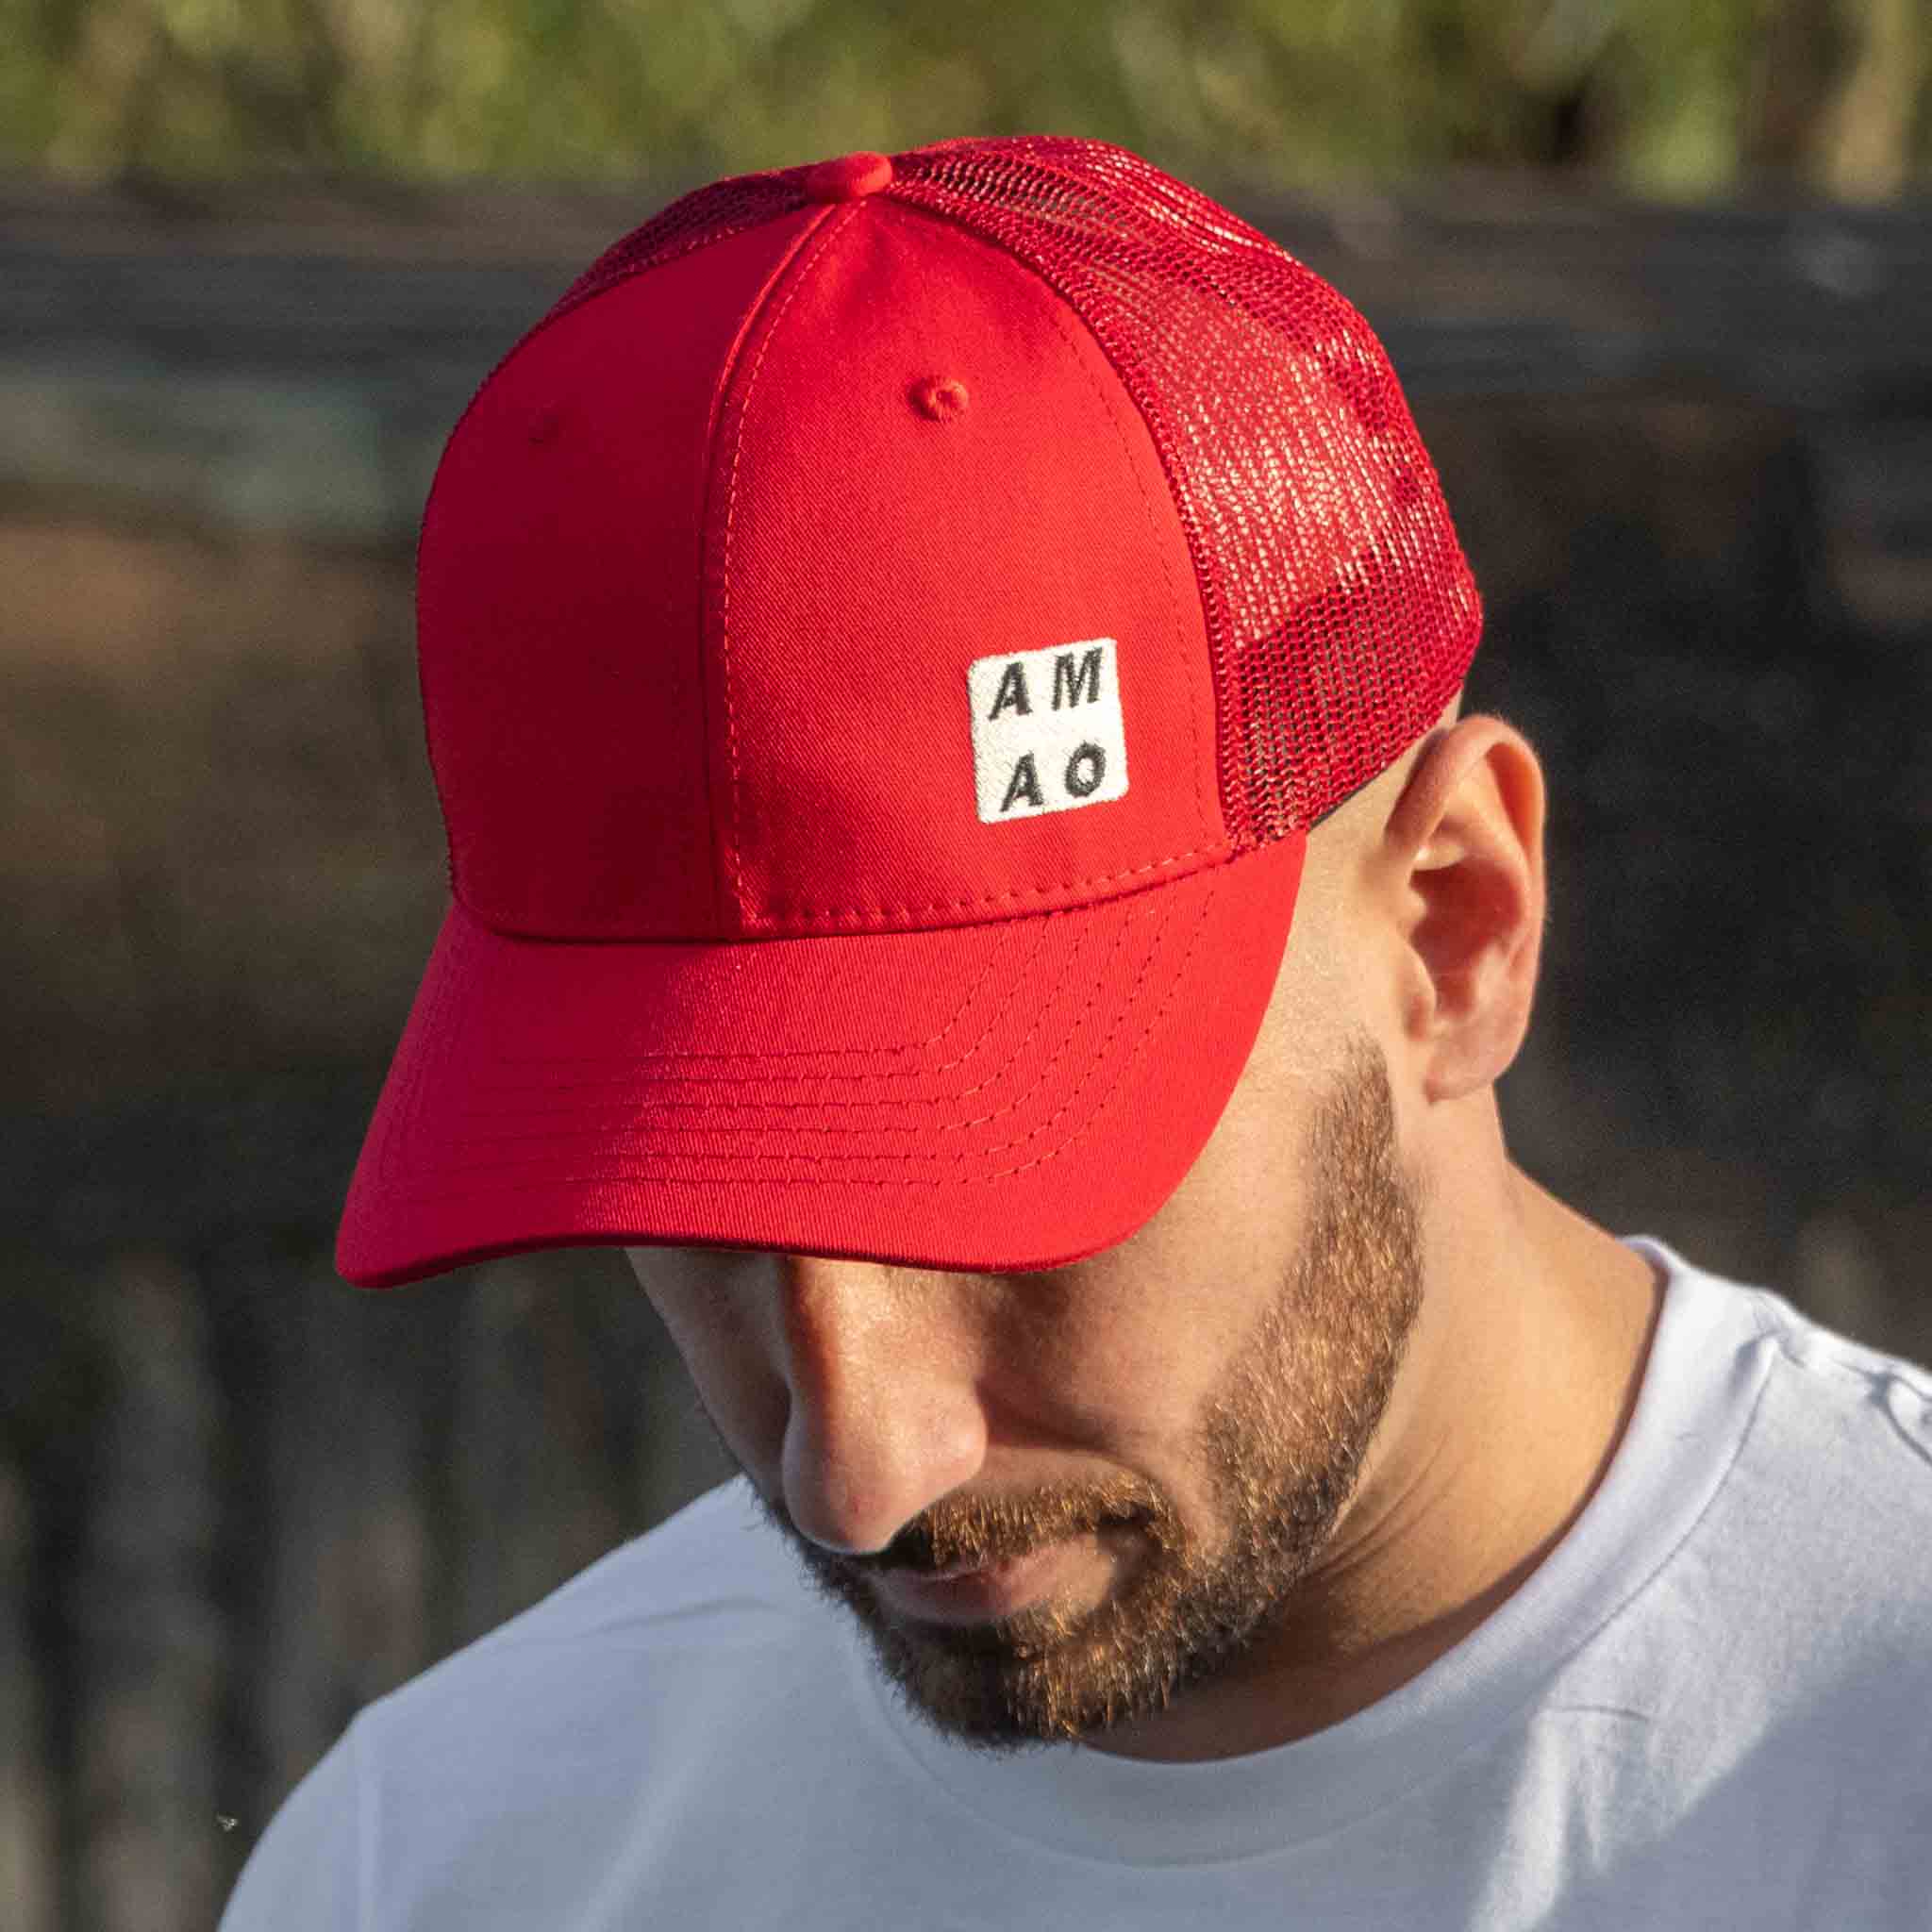 AMAO Trucker Hat - Red w-Red Mesh - Compare at $69